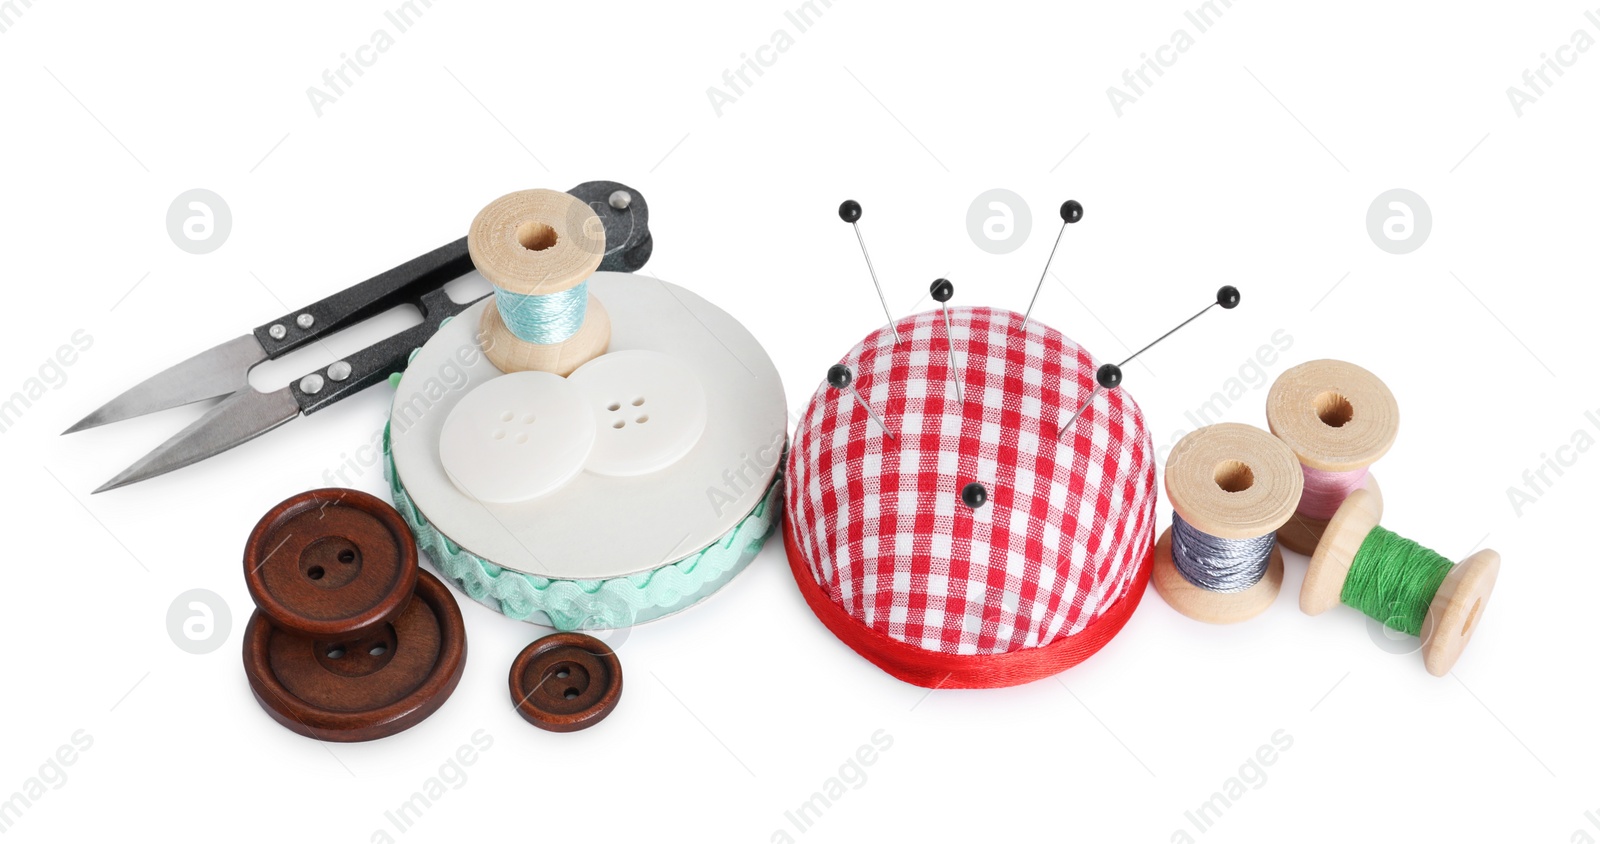 Photo of Pincushion, pins and other sewing tools isolated on white